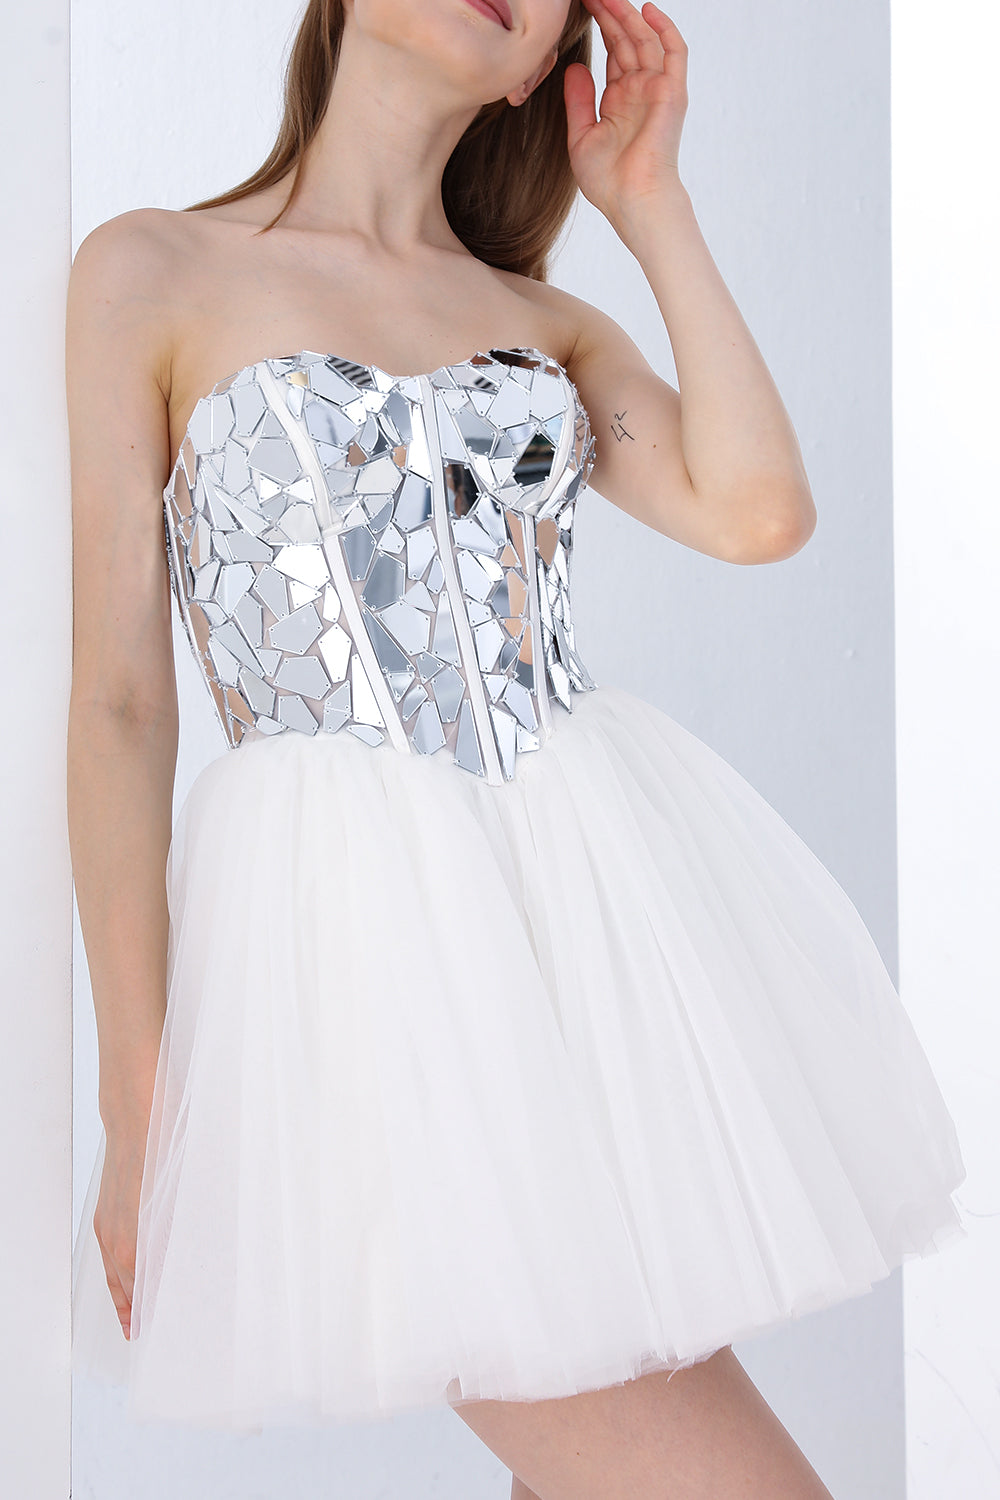 Strapless Cut Glass Mirror Embellishment Mini Dress with Lace Up Back